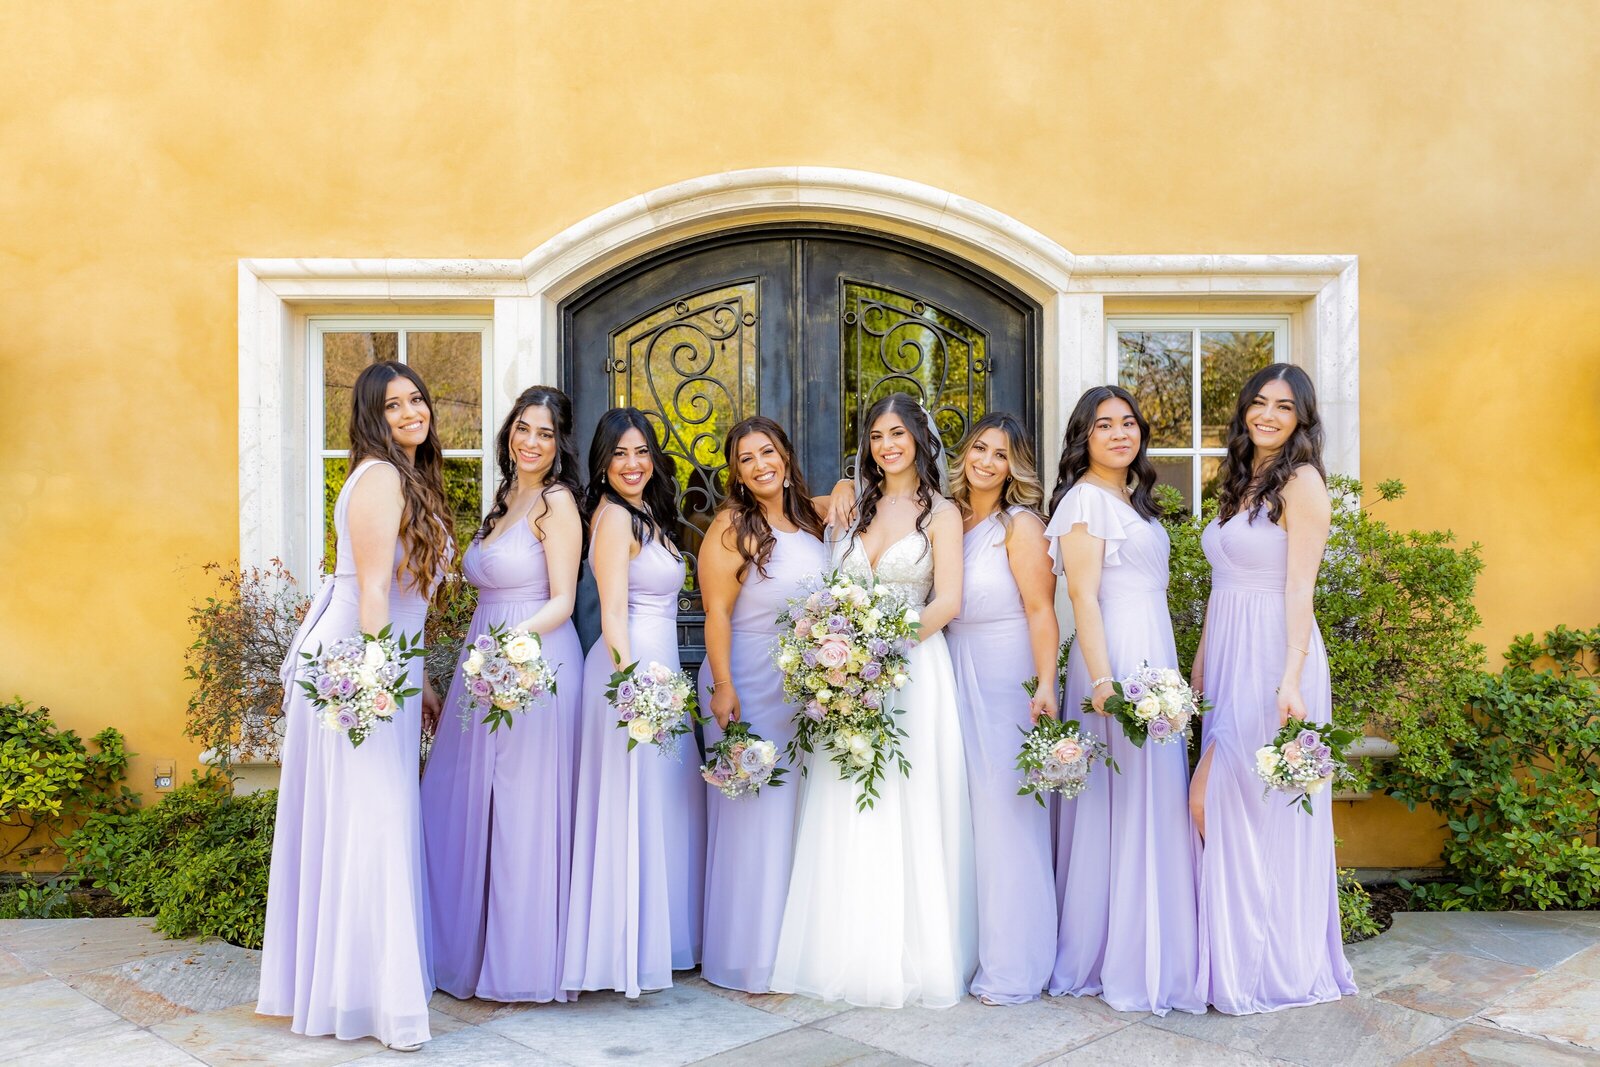 Bride stands in the center with bridesmaids who are dressed in different shades of purple smiling and looking at camera at Arden Hills in Sacramento, captured by Philippe Studio Pro.